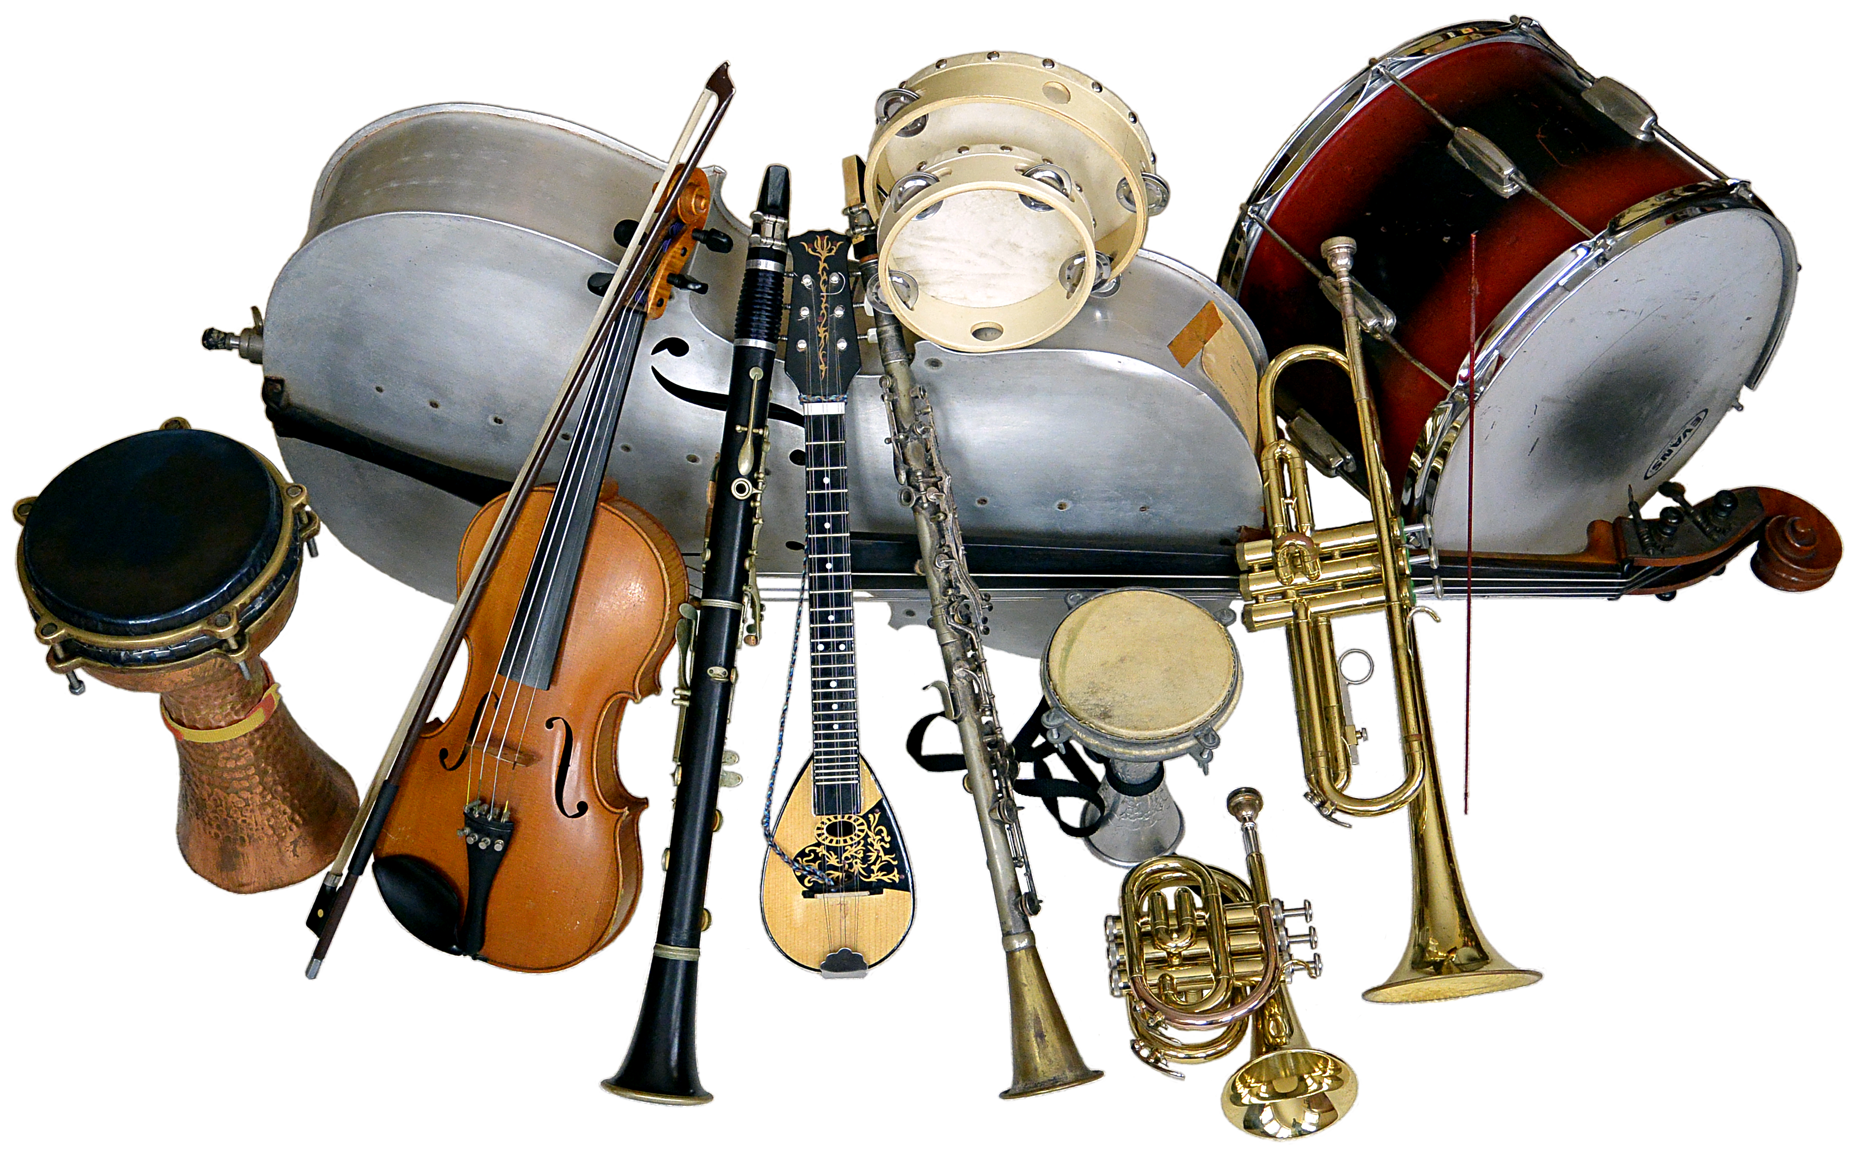 Photo of ethnic instruments including baglama, darabukas, kaval, metal Albert-system and wood Boehm-system clarinets, tambourines, tupan, trumpets, cello, and violin